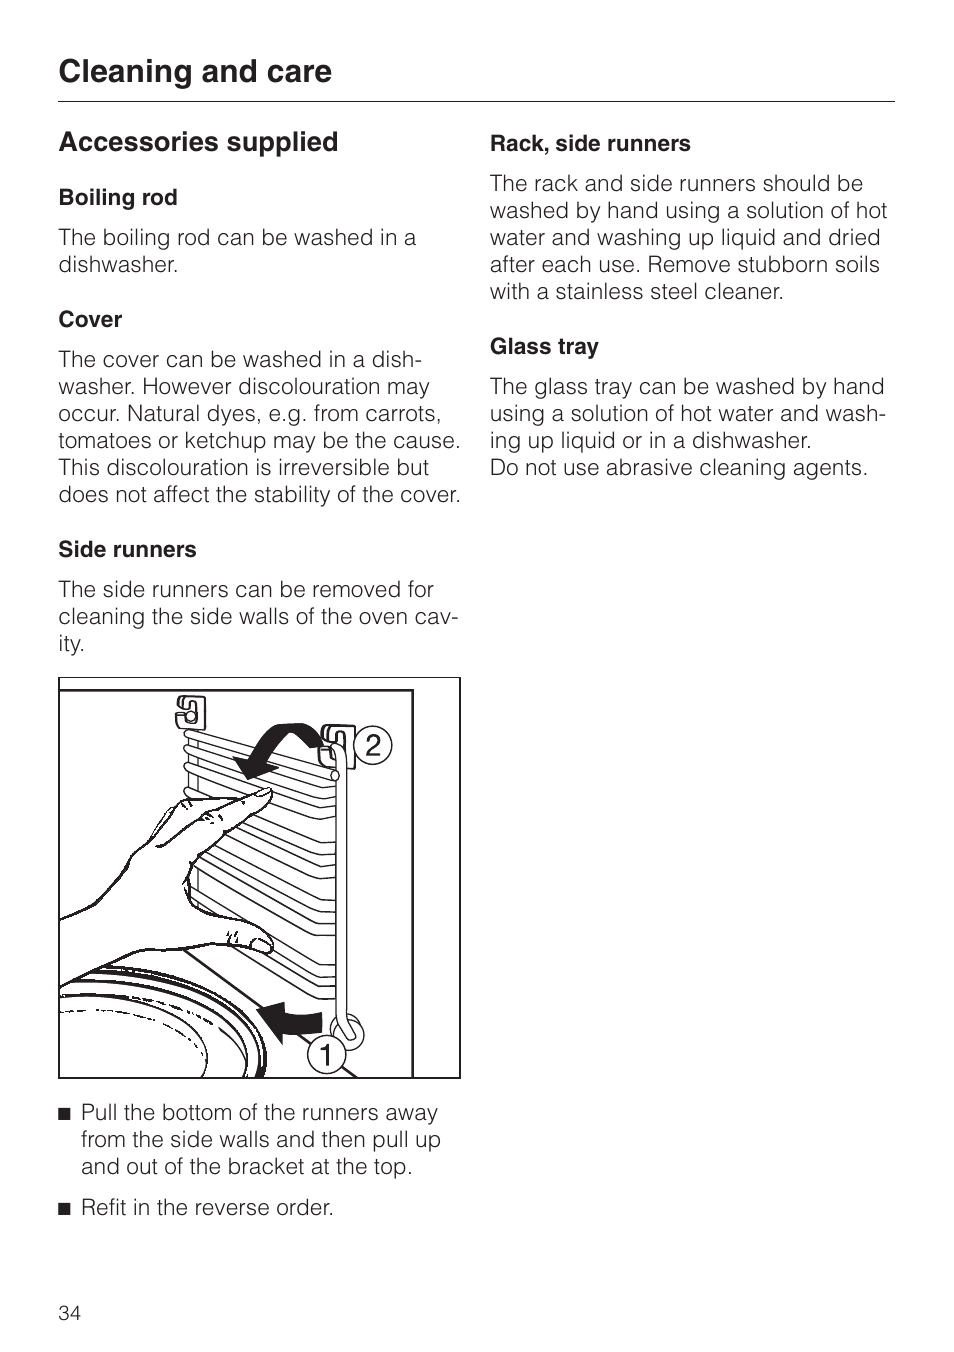 Cleaning and care, Accessories supplied | Miele M 635 EG User Manual | Page  34 / 44 | Original mode